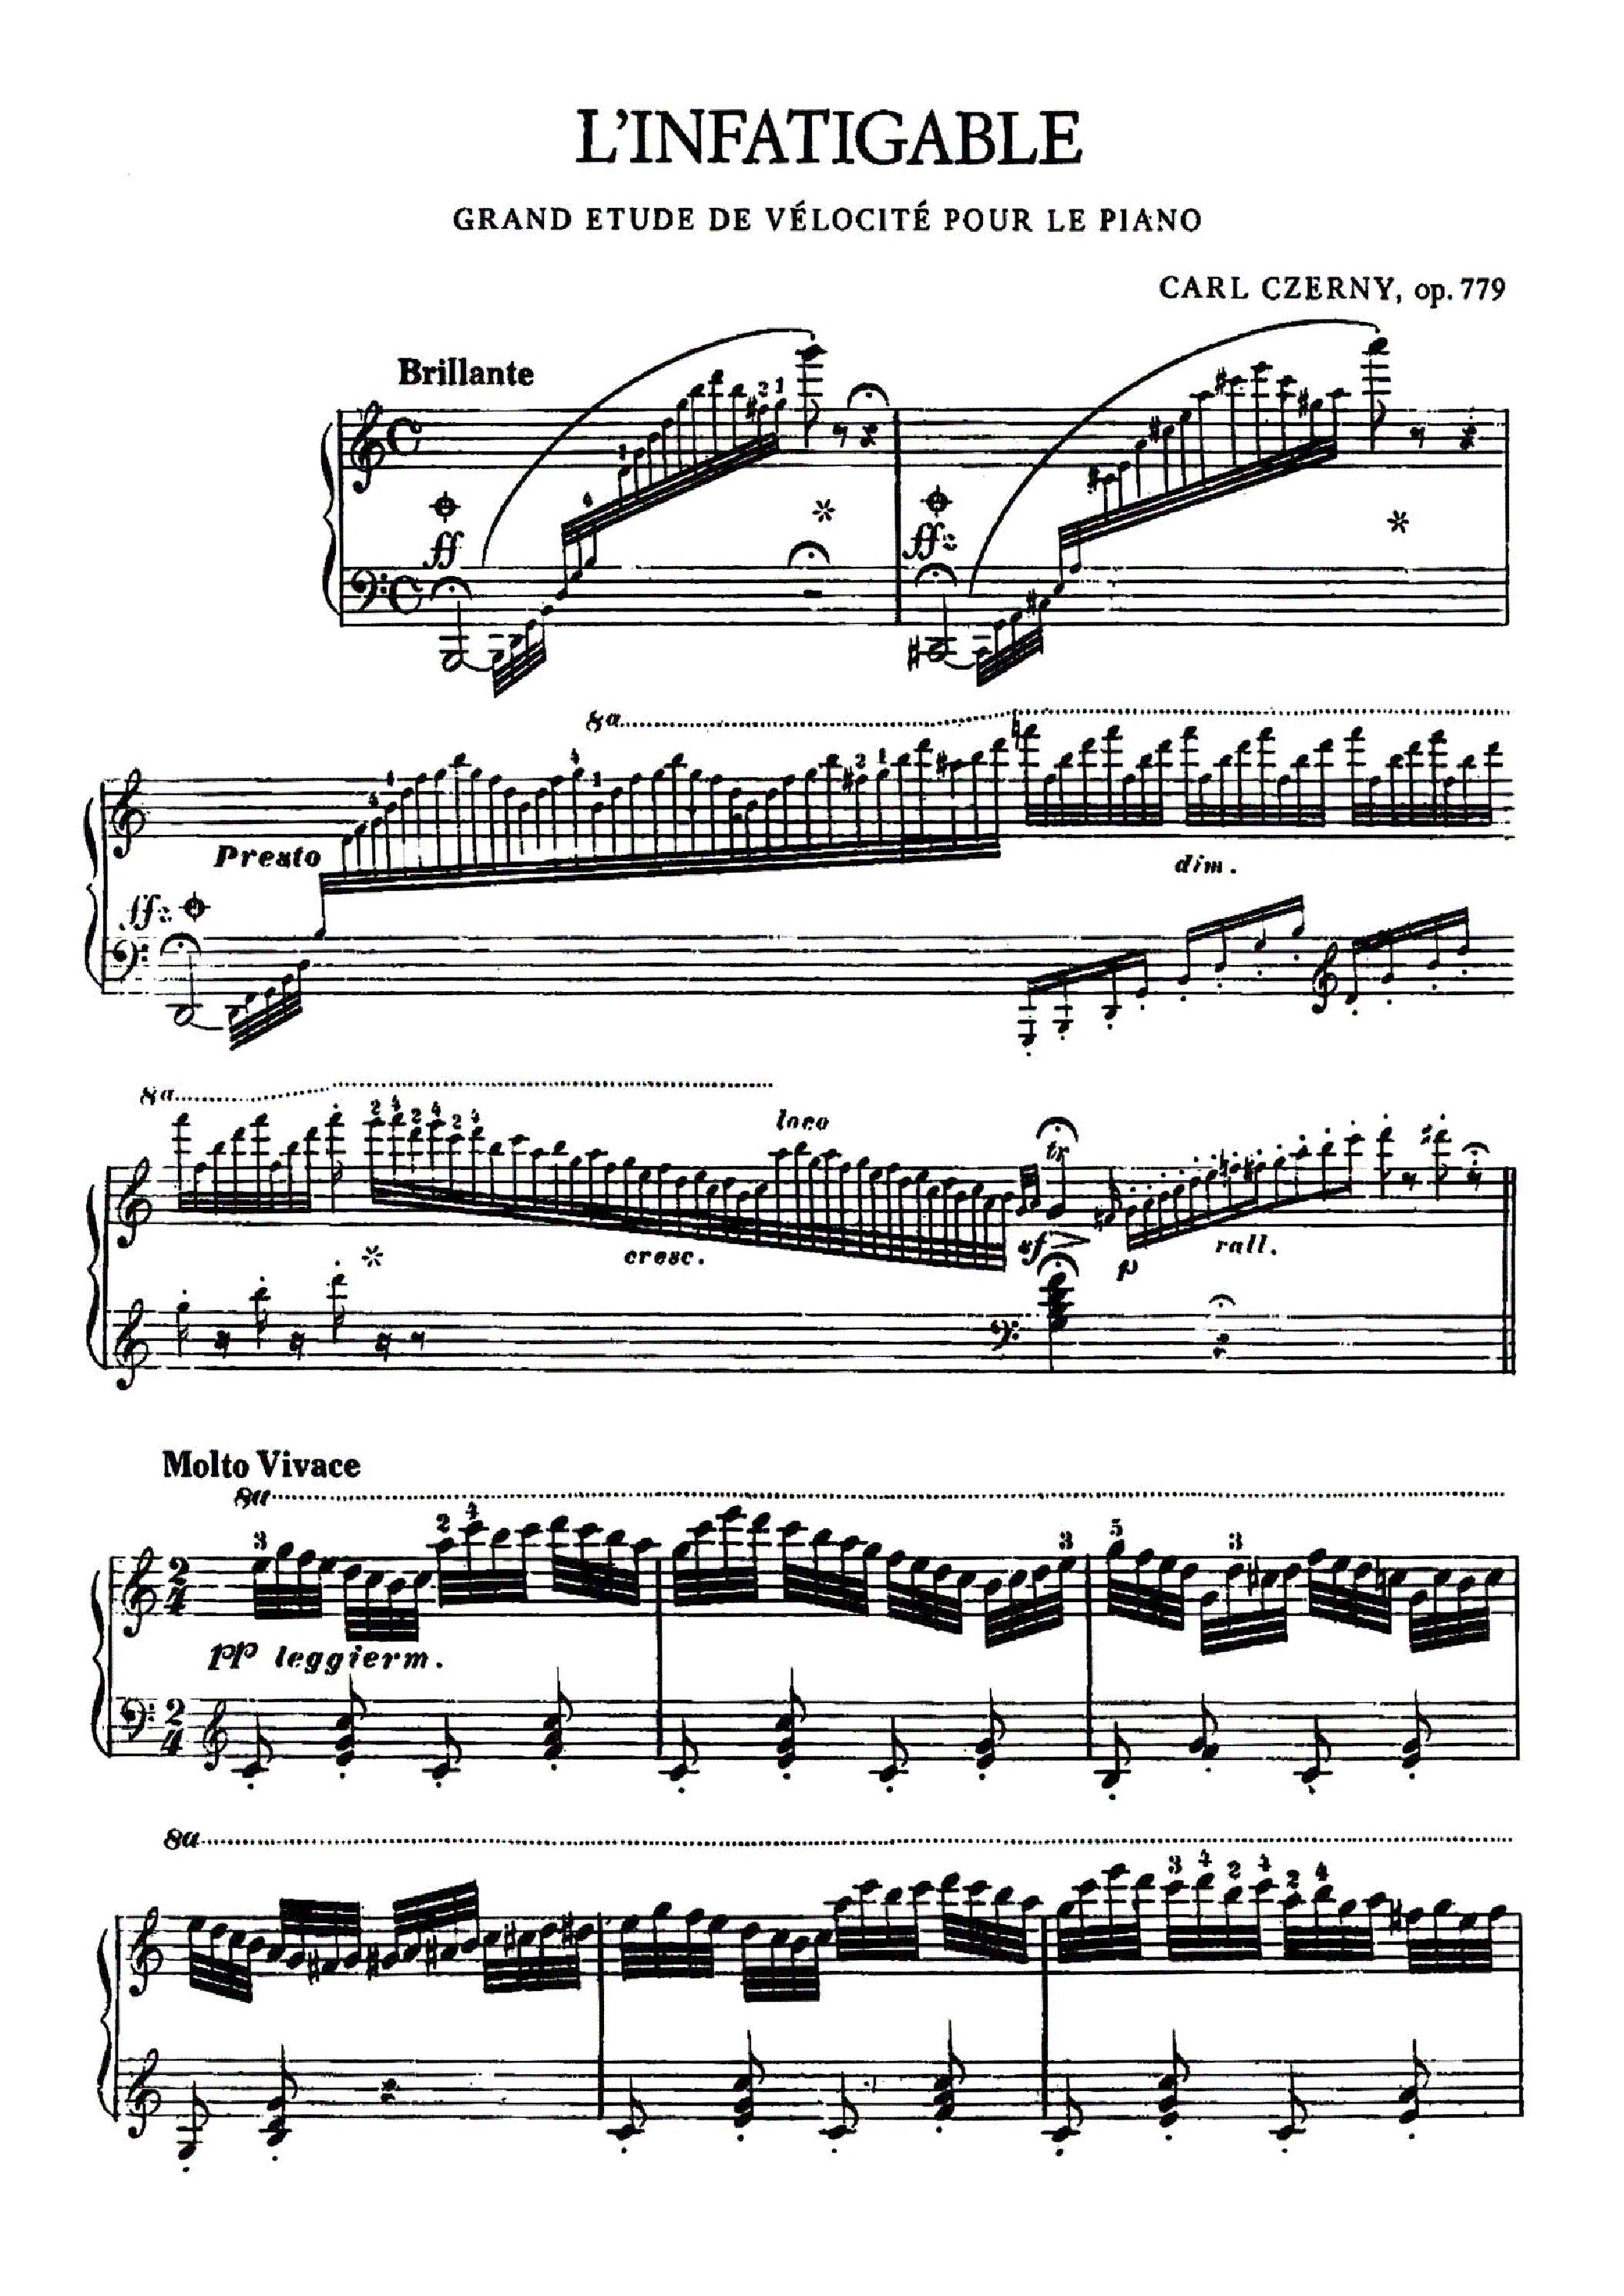 Czerny, Karl - L'Infatigable, Op.779 Sheet music for Piano - 8notes.com